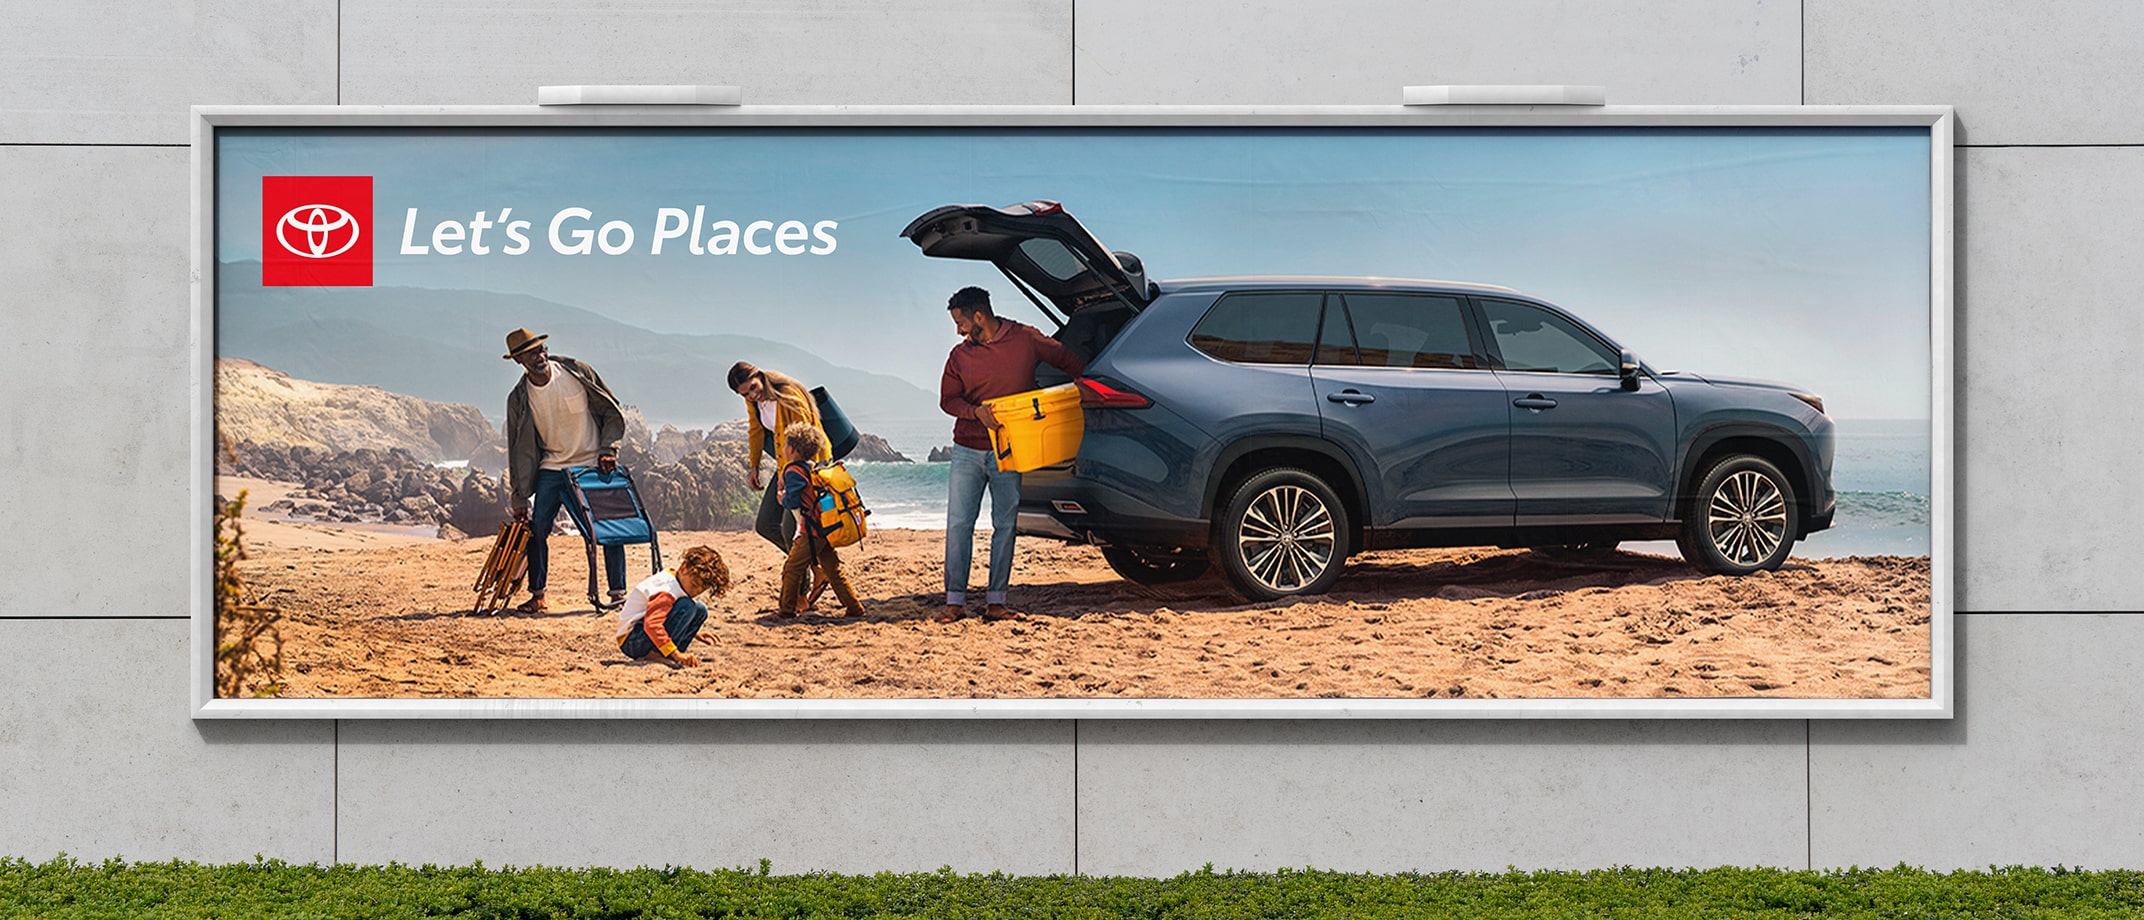 An ad with the Let’s Go Places logo. In the image, next to rocky cliffs and the ocean, a family unloads their Highlander with chairs and a yellow cooler.